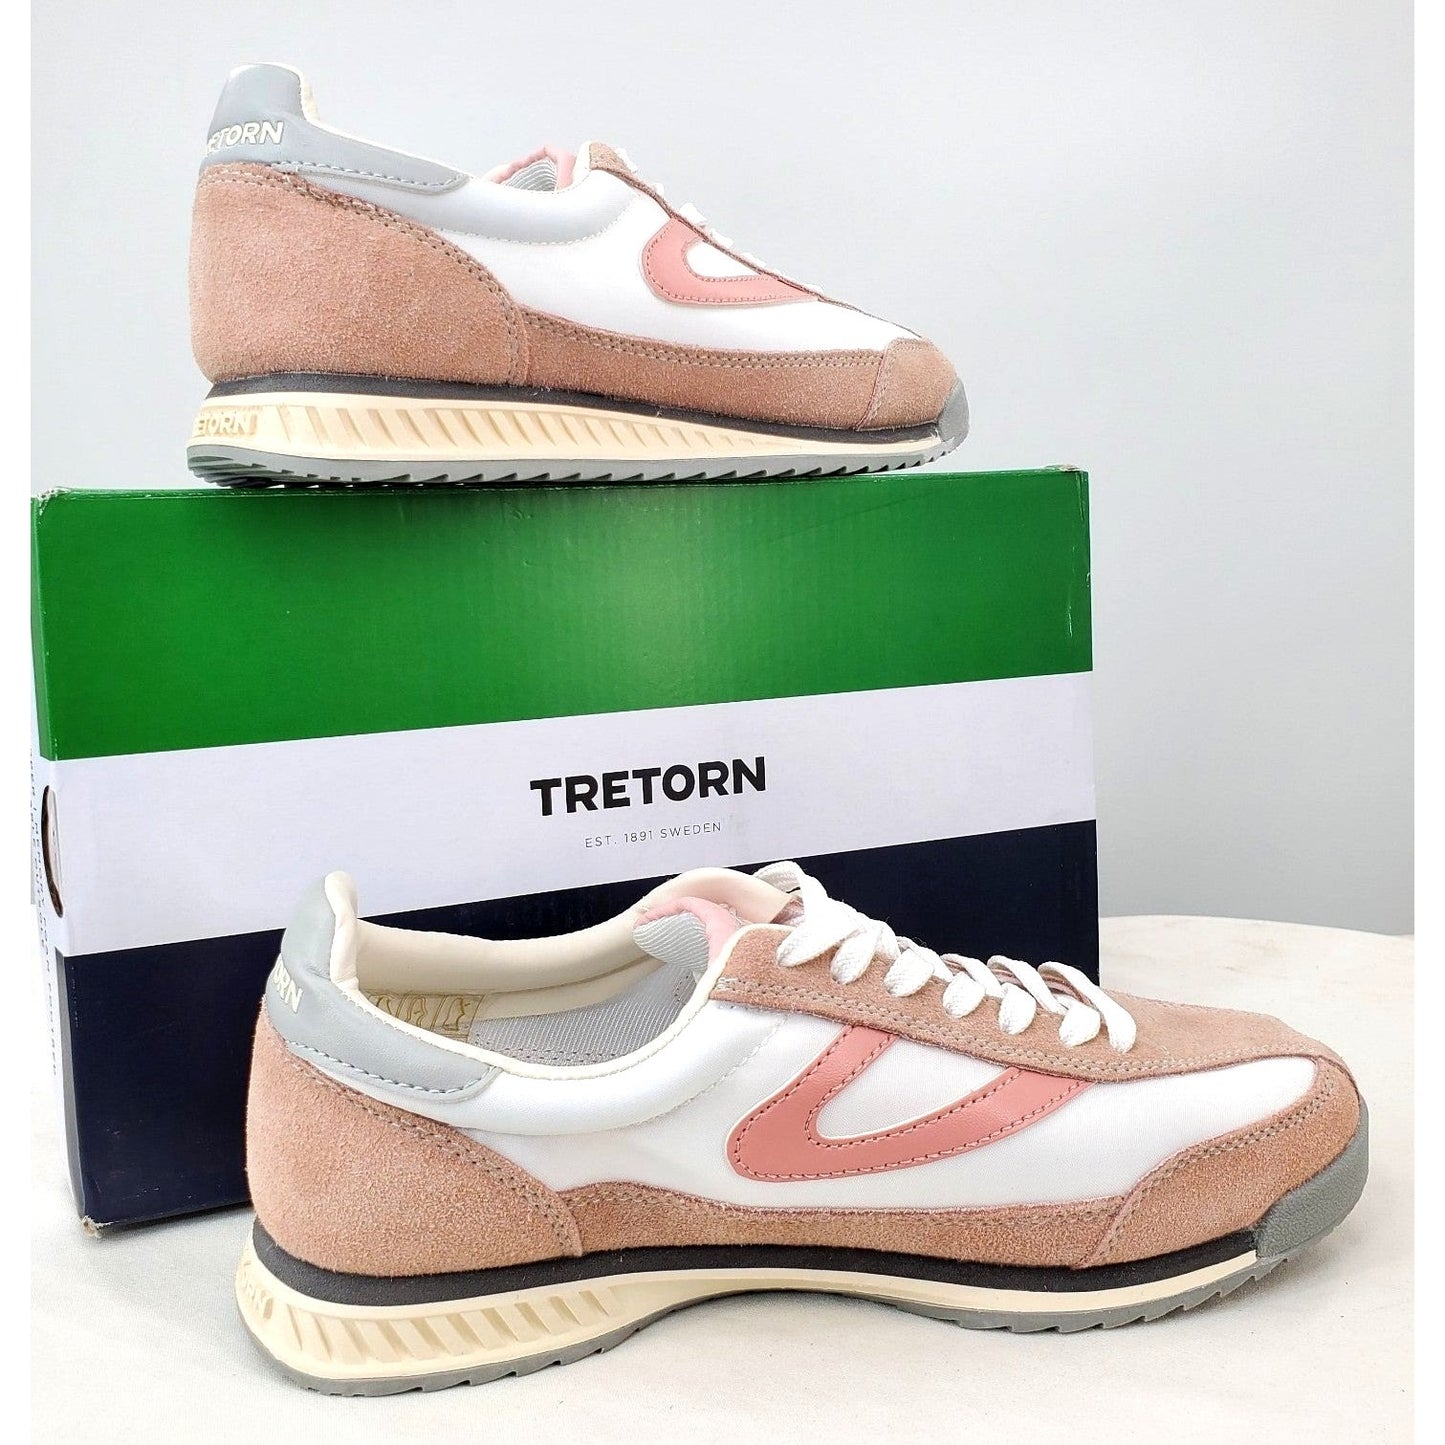 TRETORN Sneakers Women's Rawlins Lace-Up Casual Tennis Shoes Classic Retro